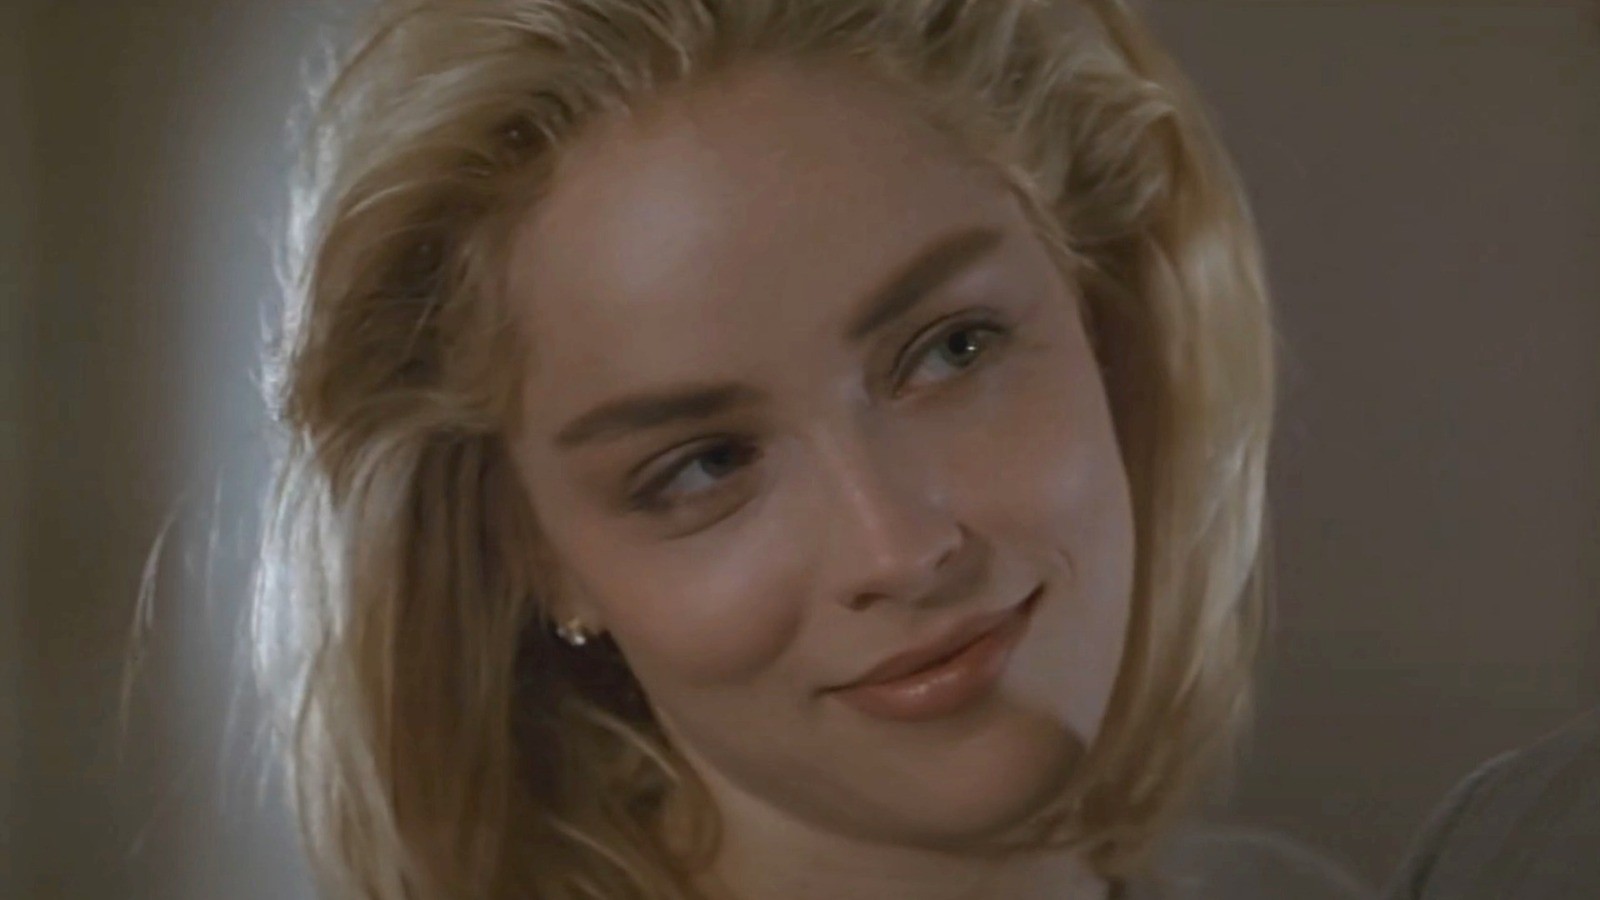 Embodying the character took a significant tool on Sharon Stone